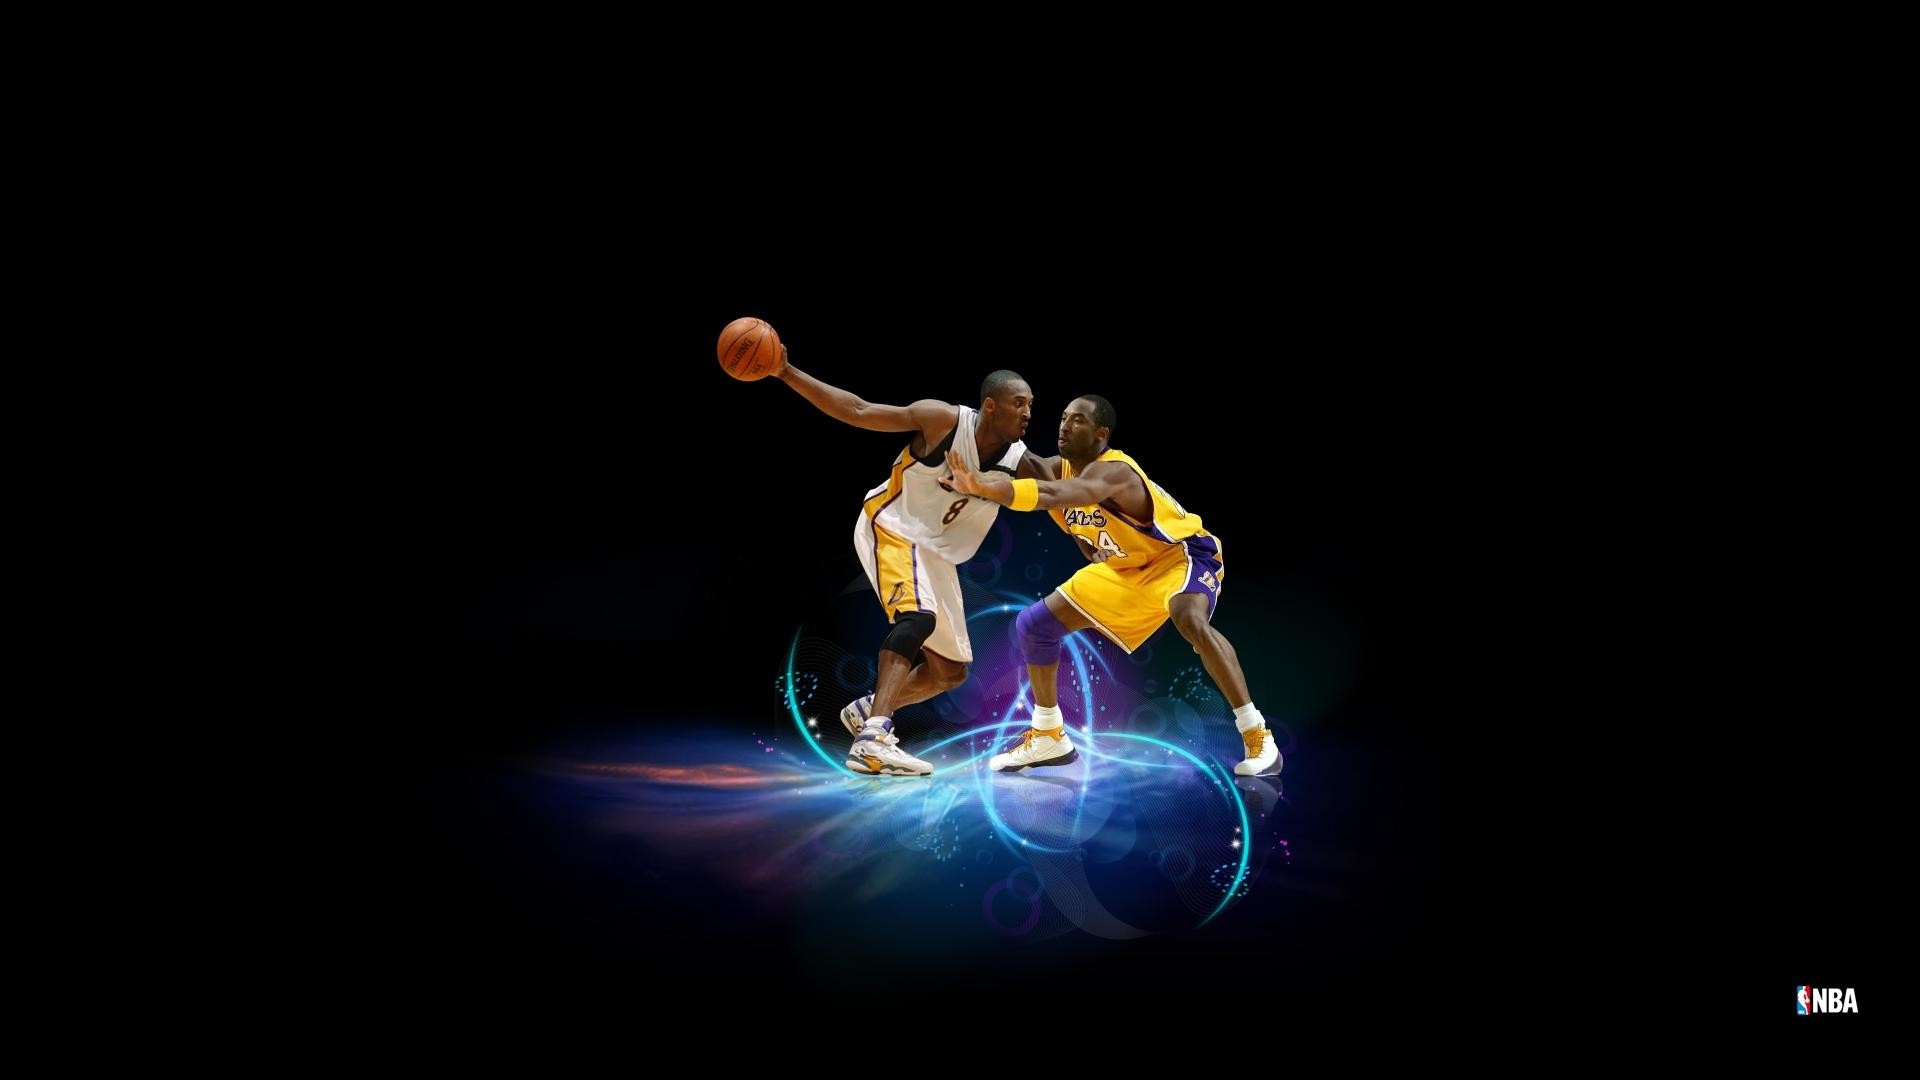 1920x1080 (Wide HD 2018-07-14), Cool Basketball Wallpapers HD